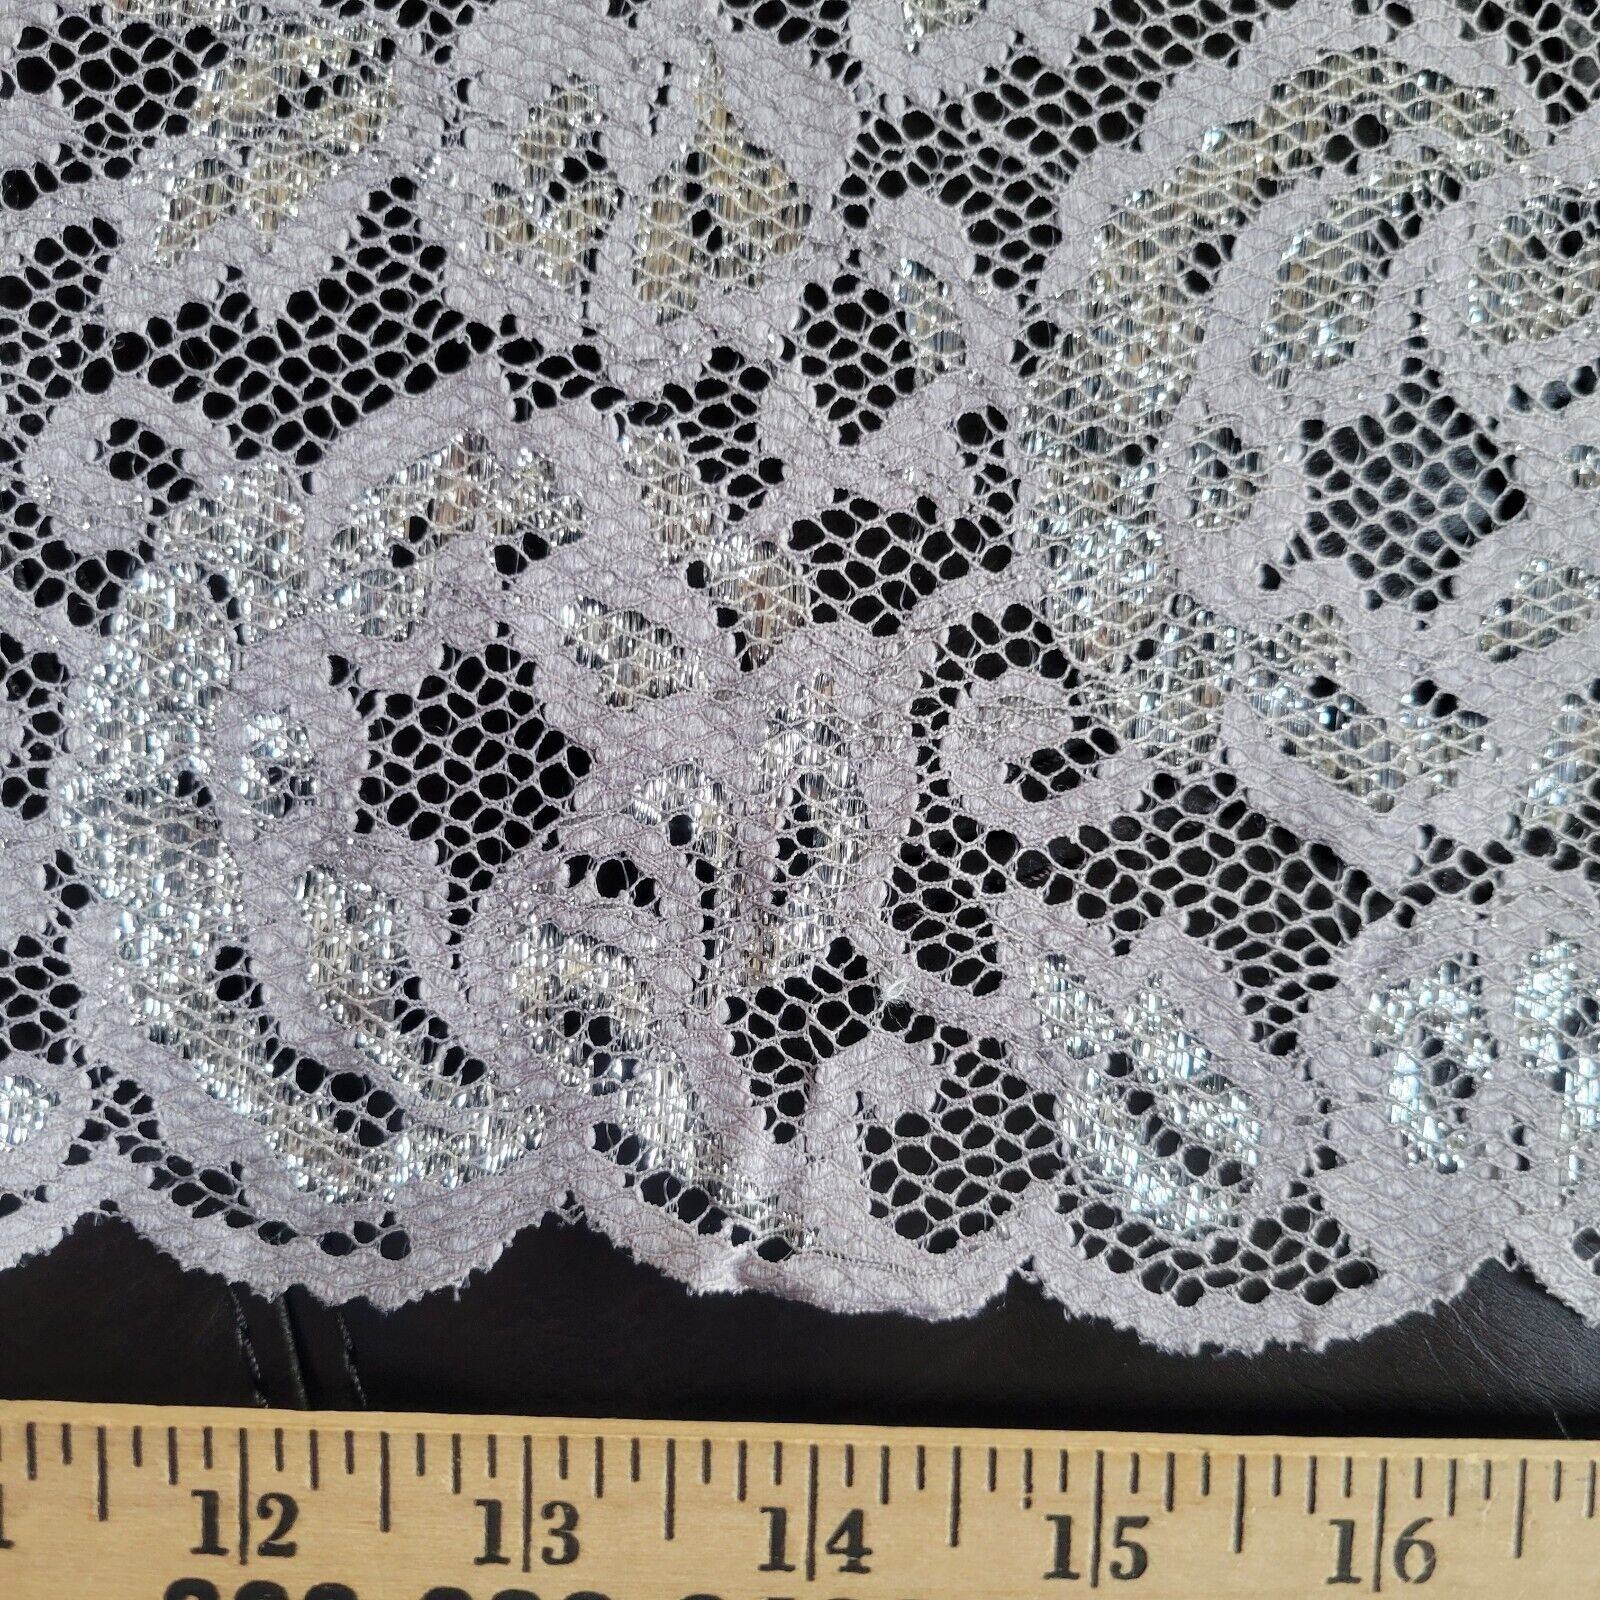 6 1/2 Wide Pale Gray Stretch Leavers Lace Trim, Made in France, Sold by the  Yard -  Canada